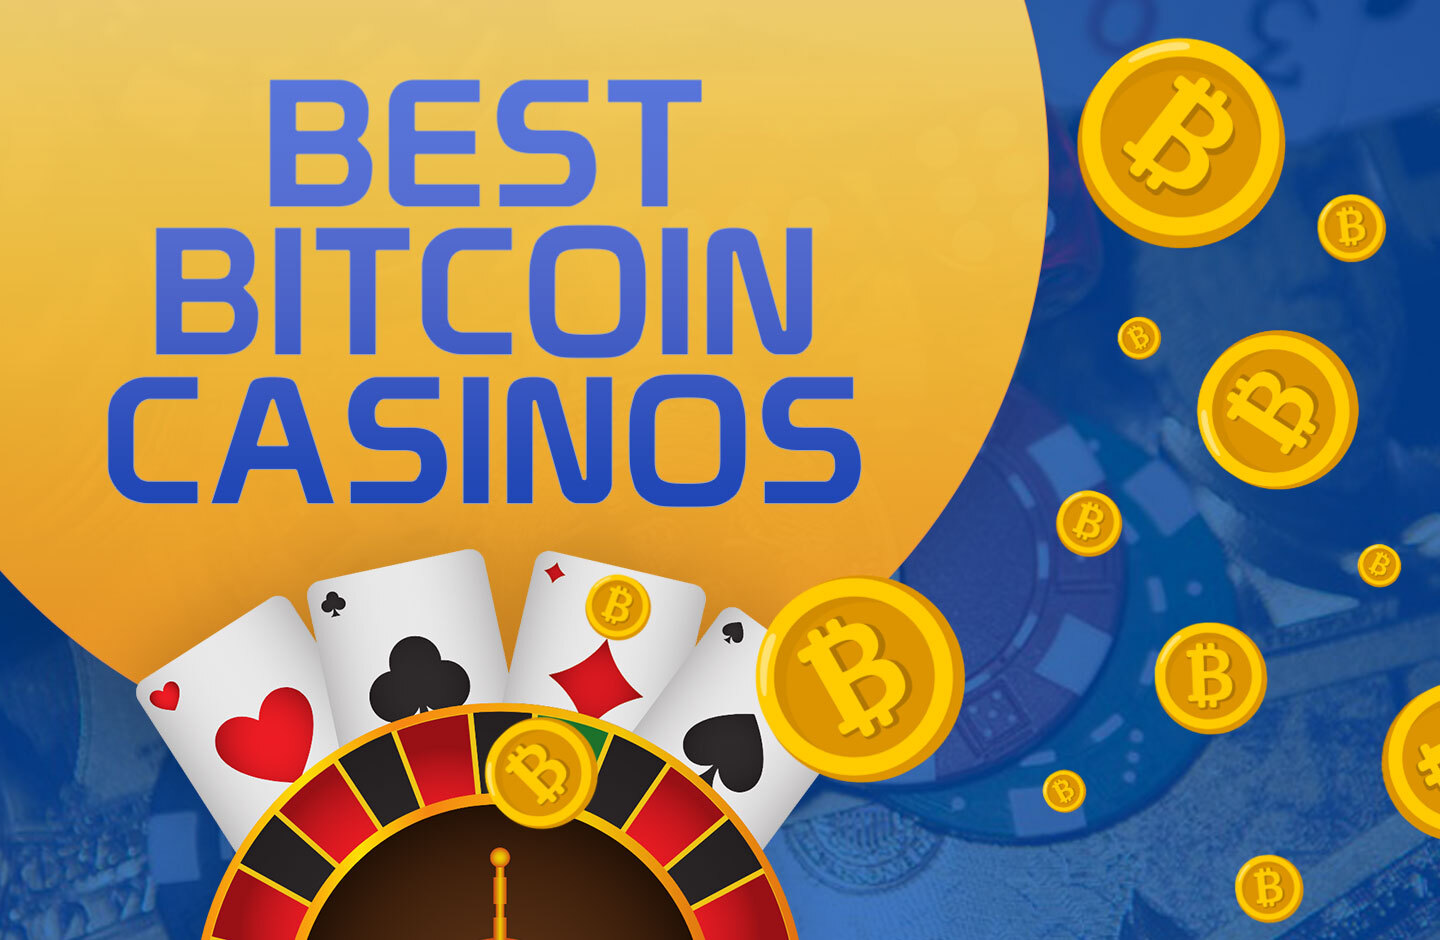 bitcoin online gambling sites and Identity: Exploring Self-Perception